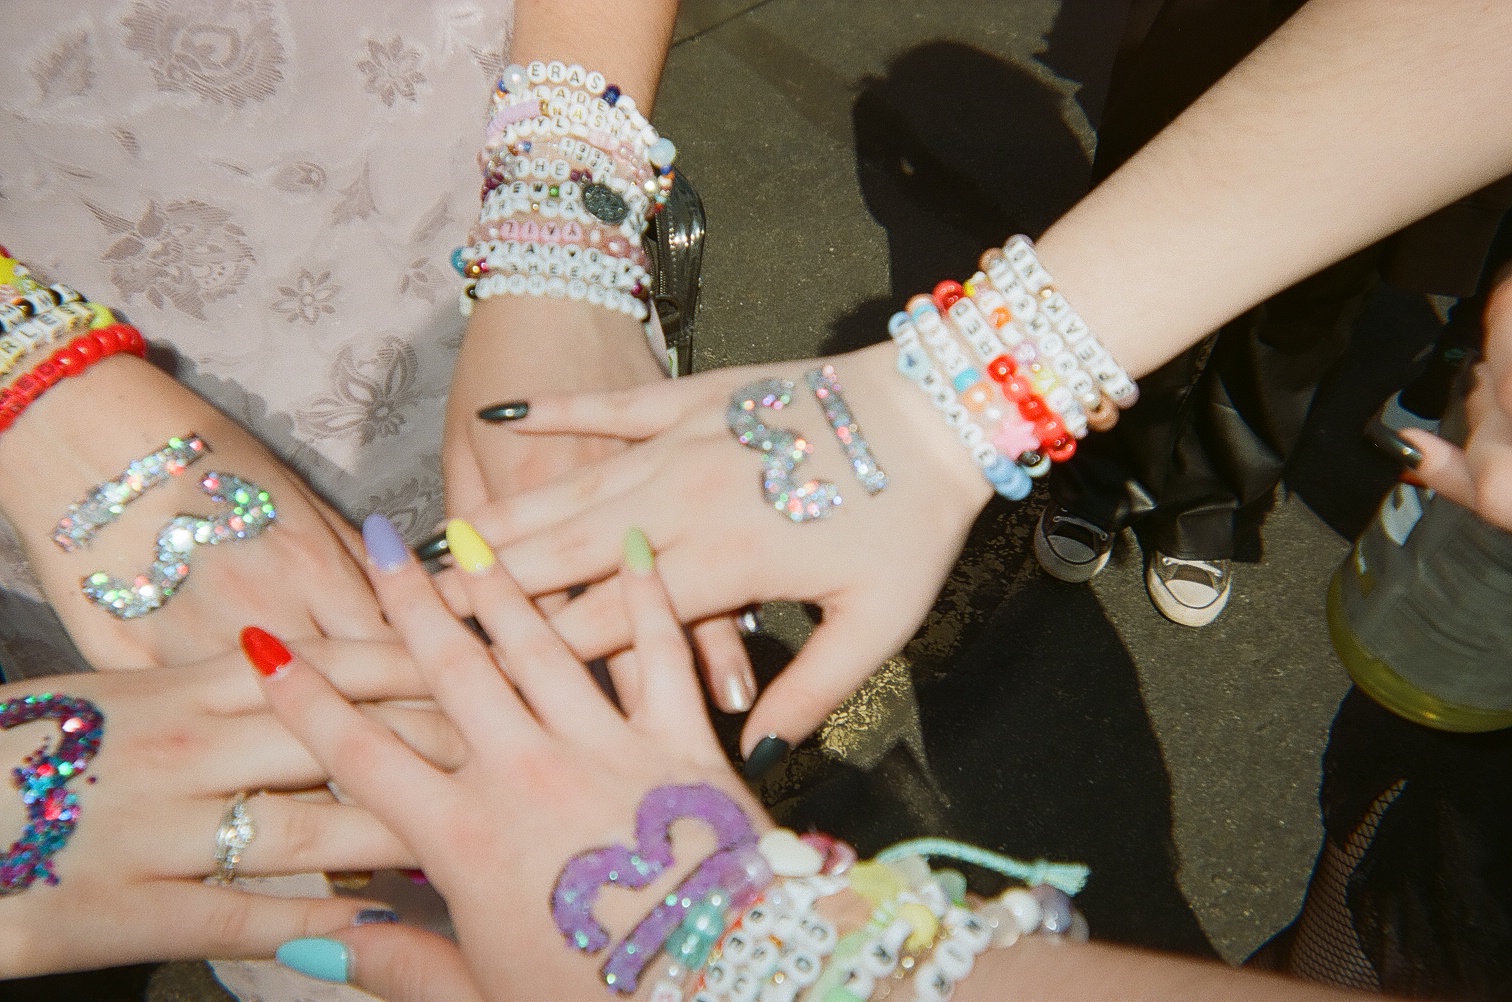 Four hands placed together with number 13s drawn on their hands and friendship bracelets on their arms.